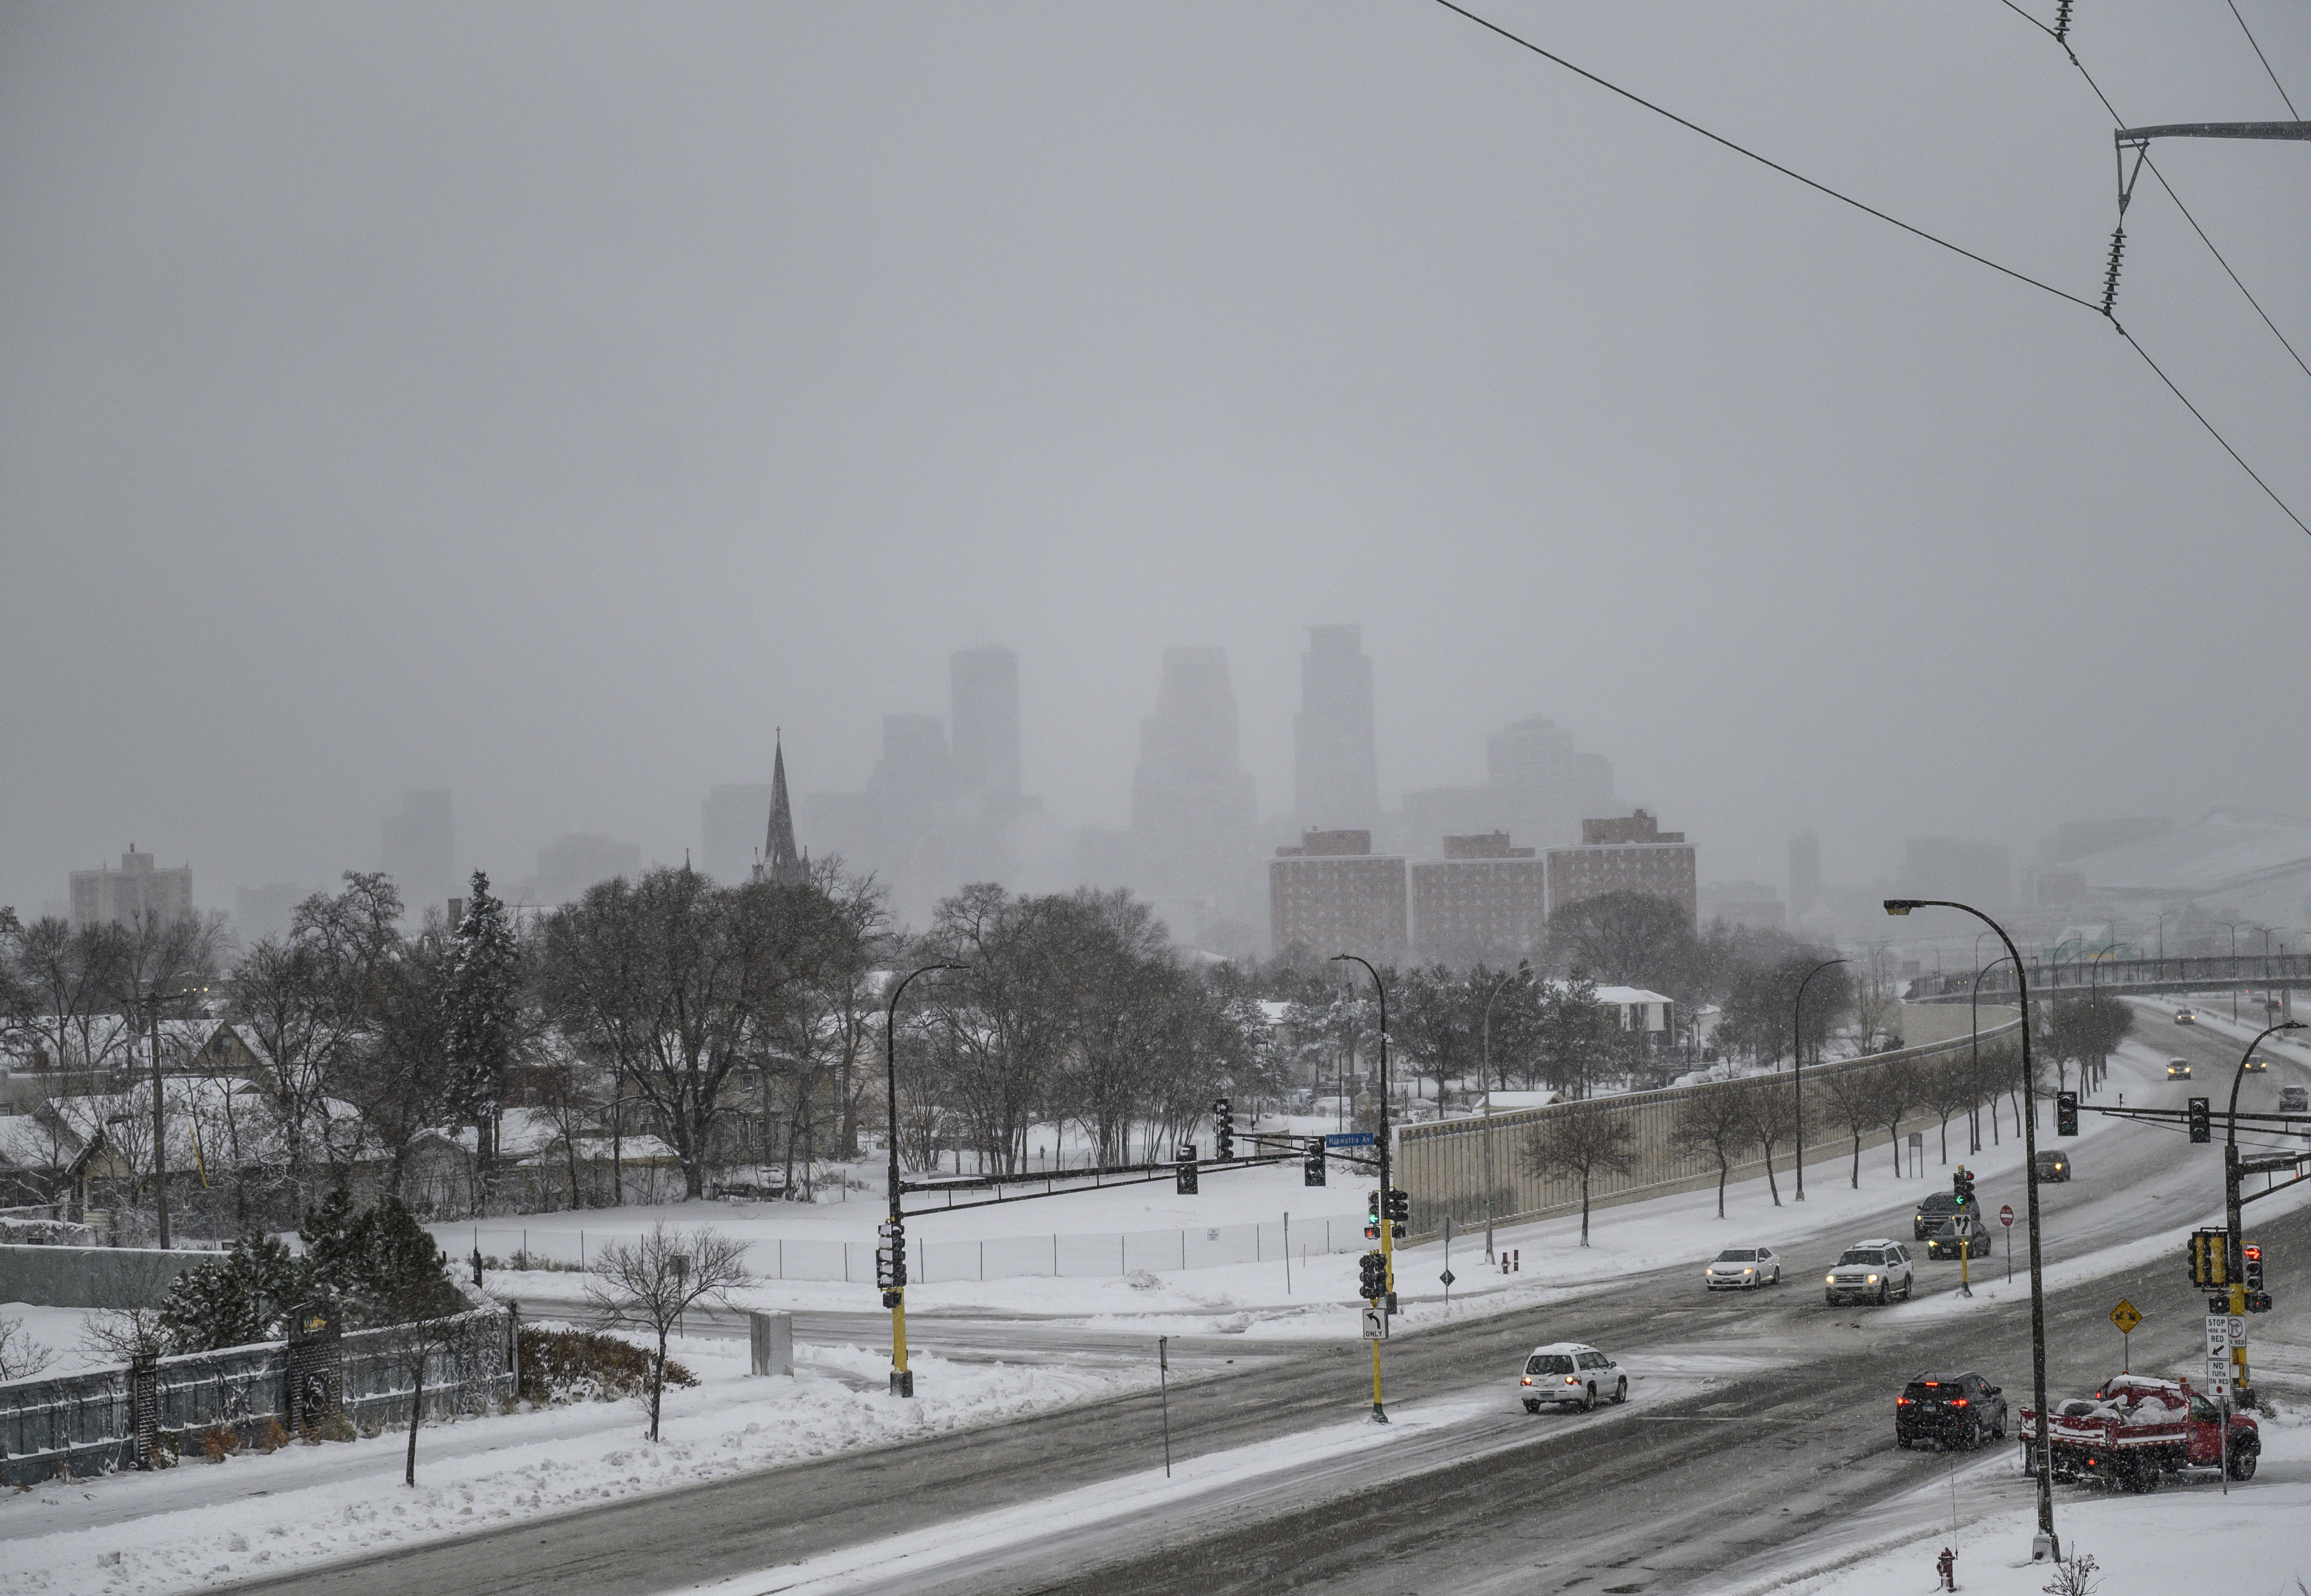 Snow continues to fall in Minneapolis, Minnesota on Wednesday.